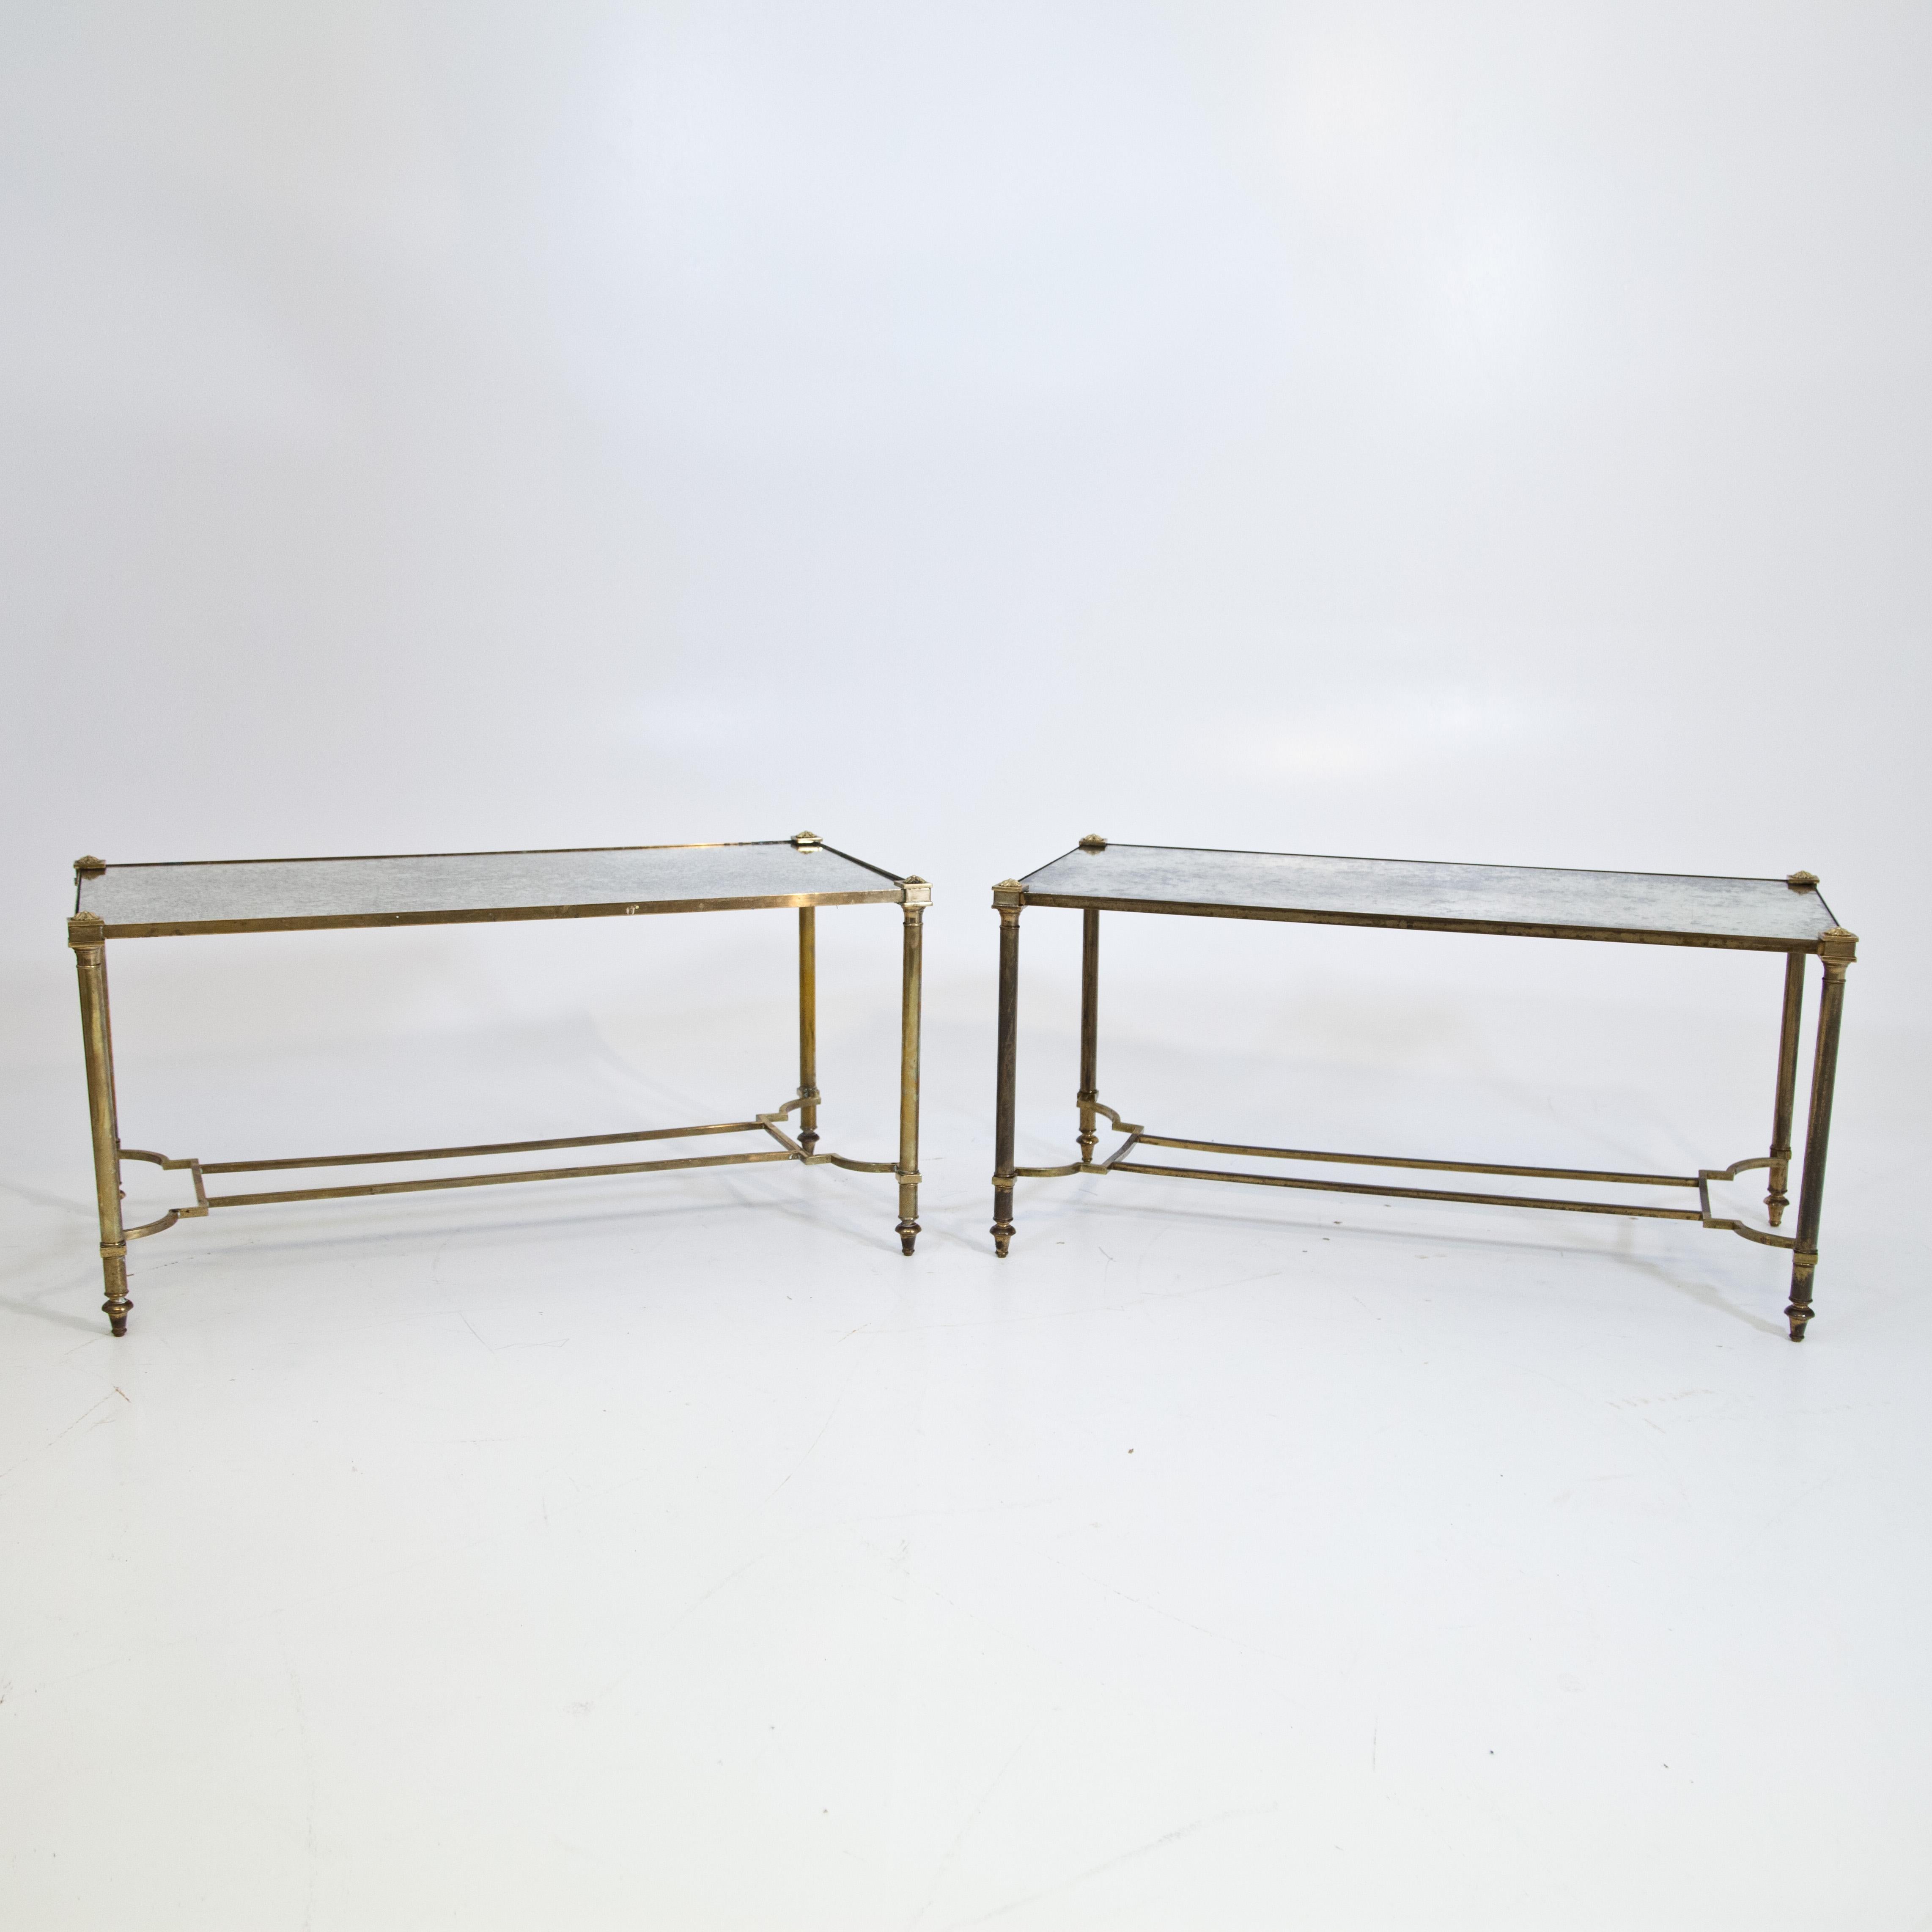 A pair of cocktail tables attributed to Maison Jansen. Patinated brass and mirror glass.